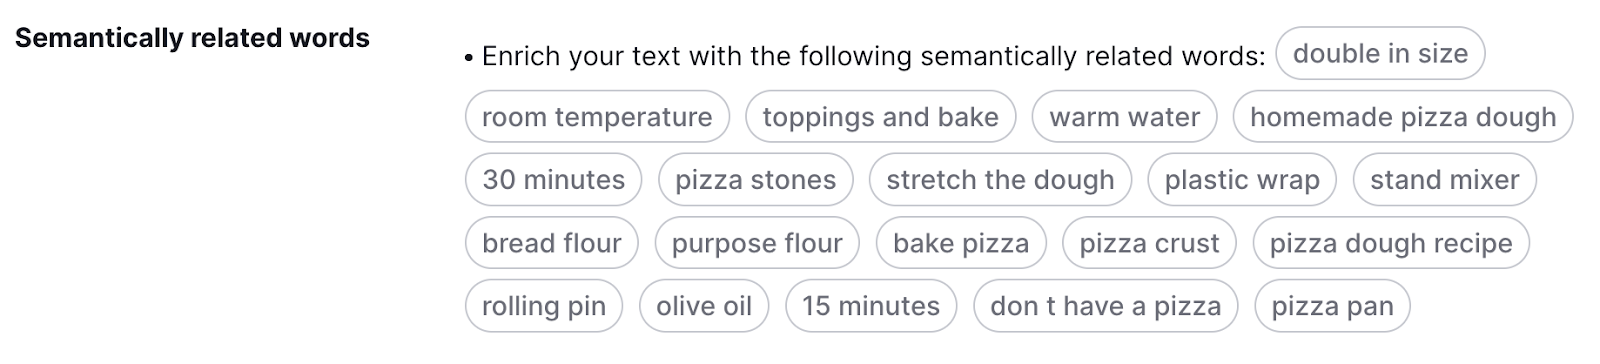 Semantically related keywords section in SEO Content Template tool for “how to make pizza dough”